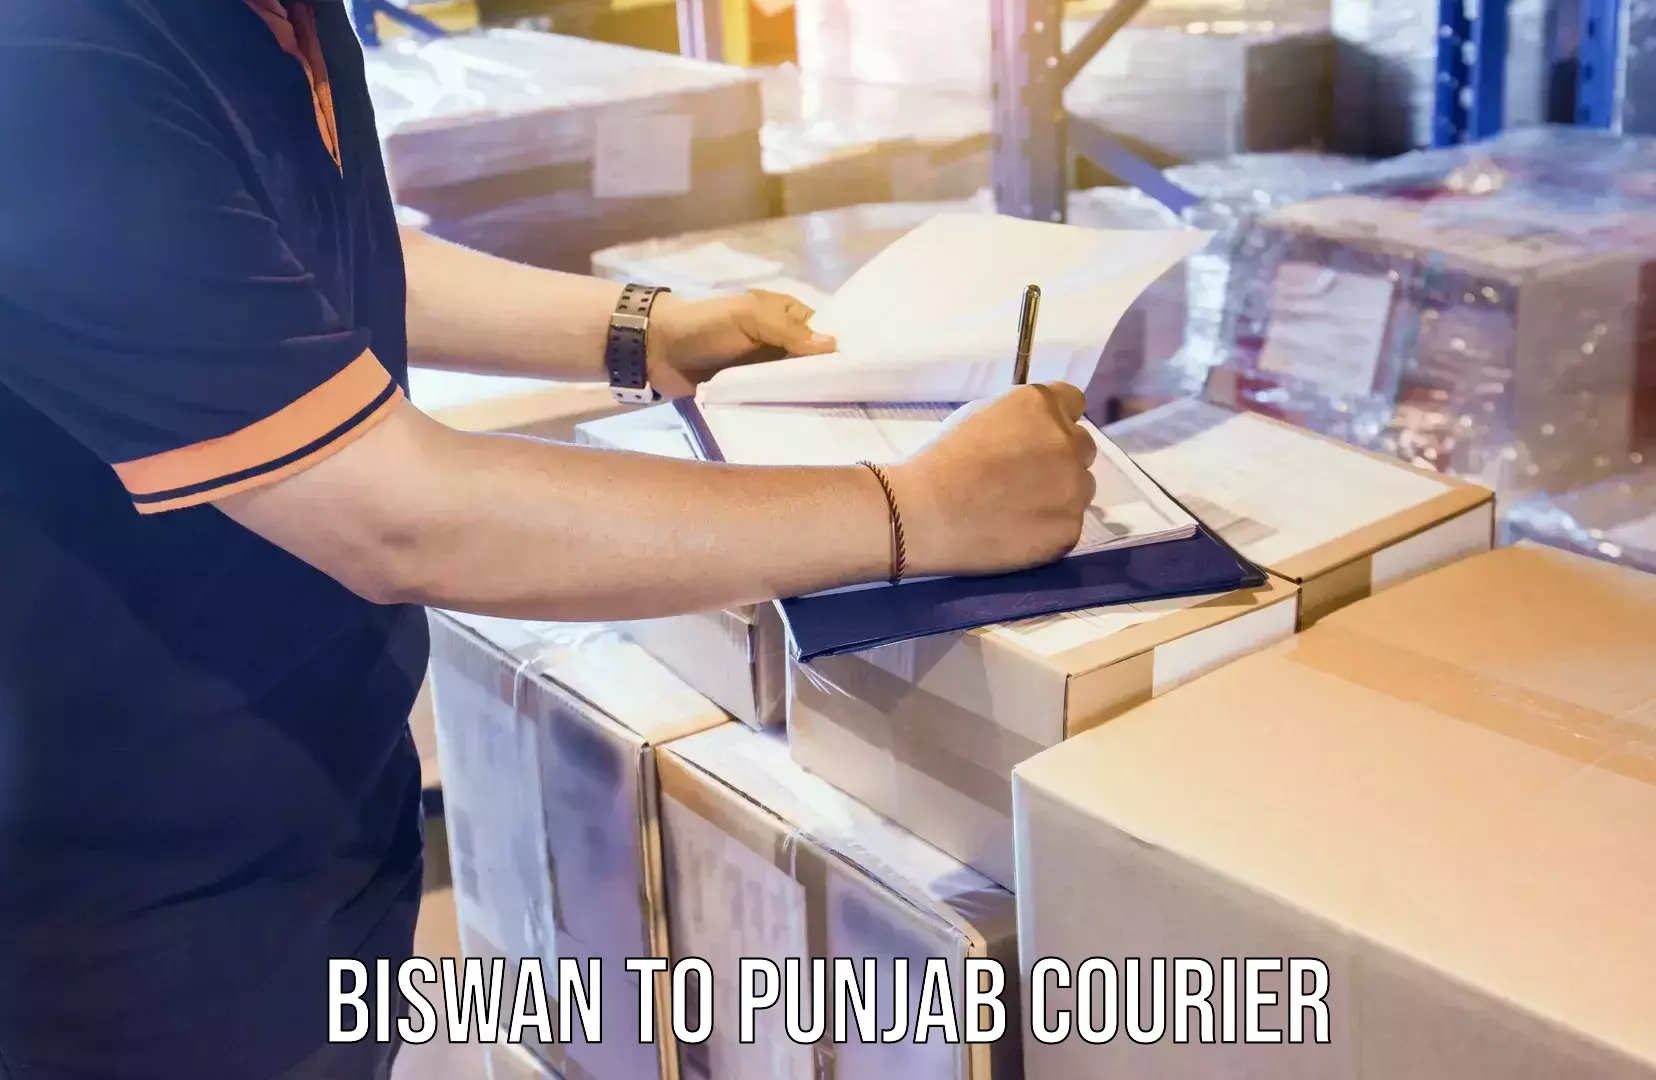 Courier service efficiency Biswan to Punjab